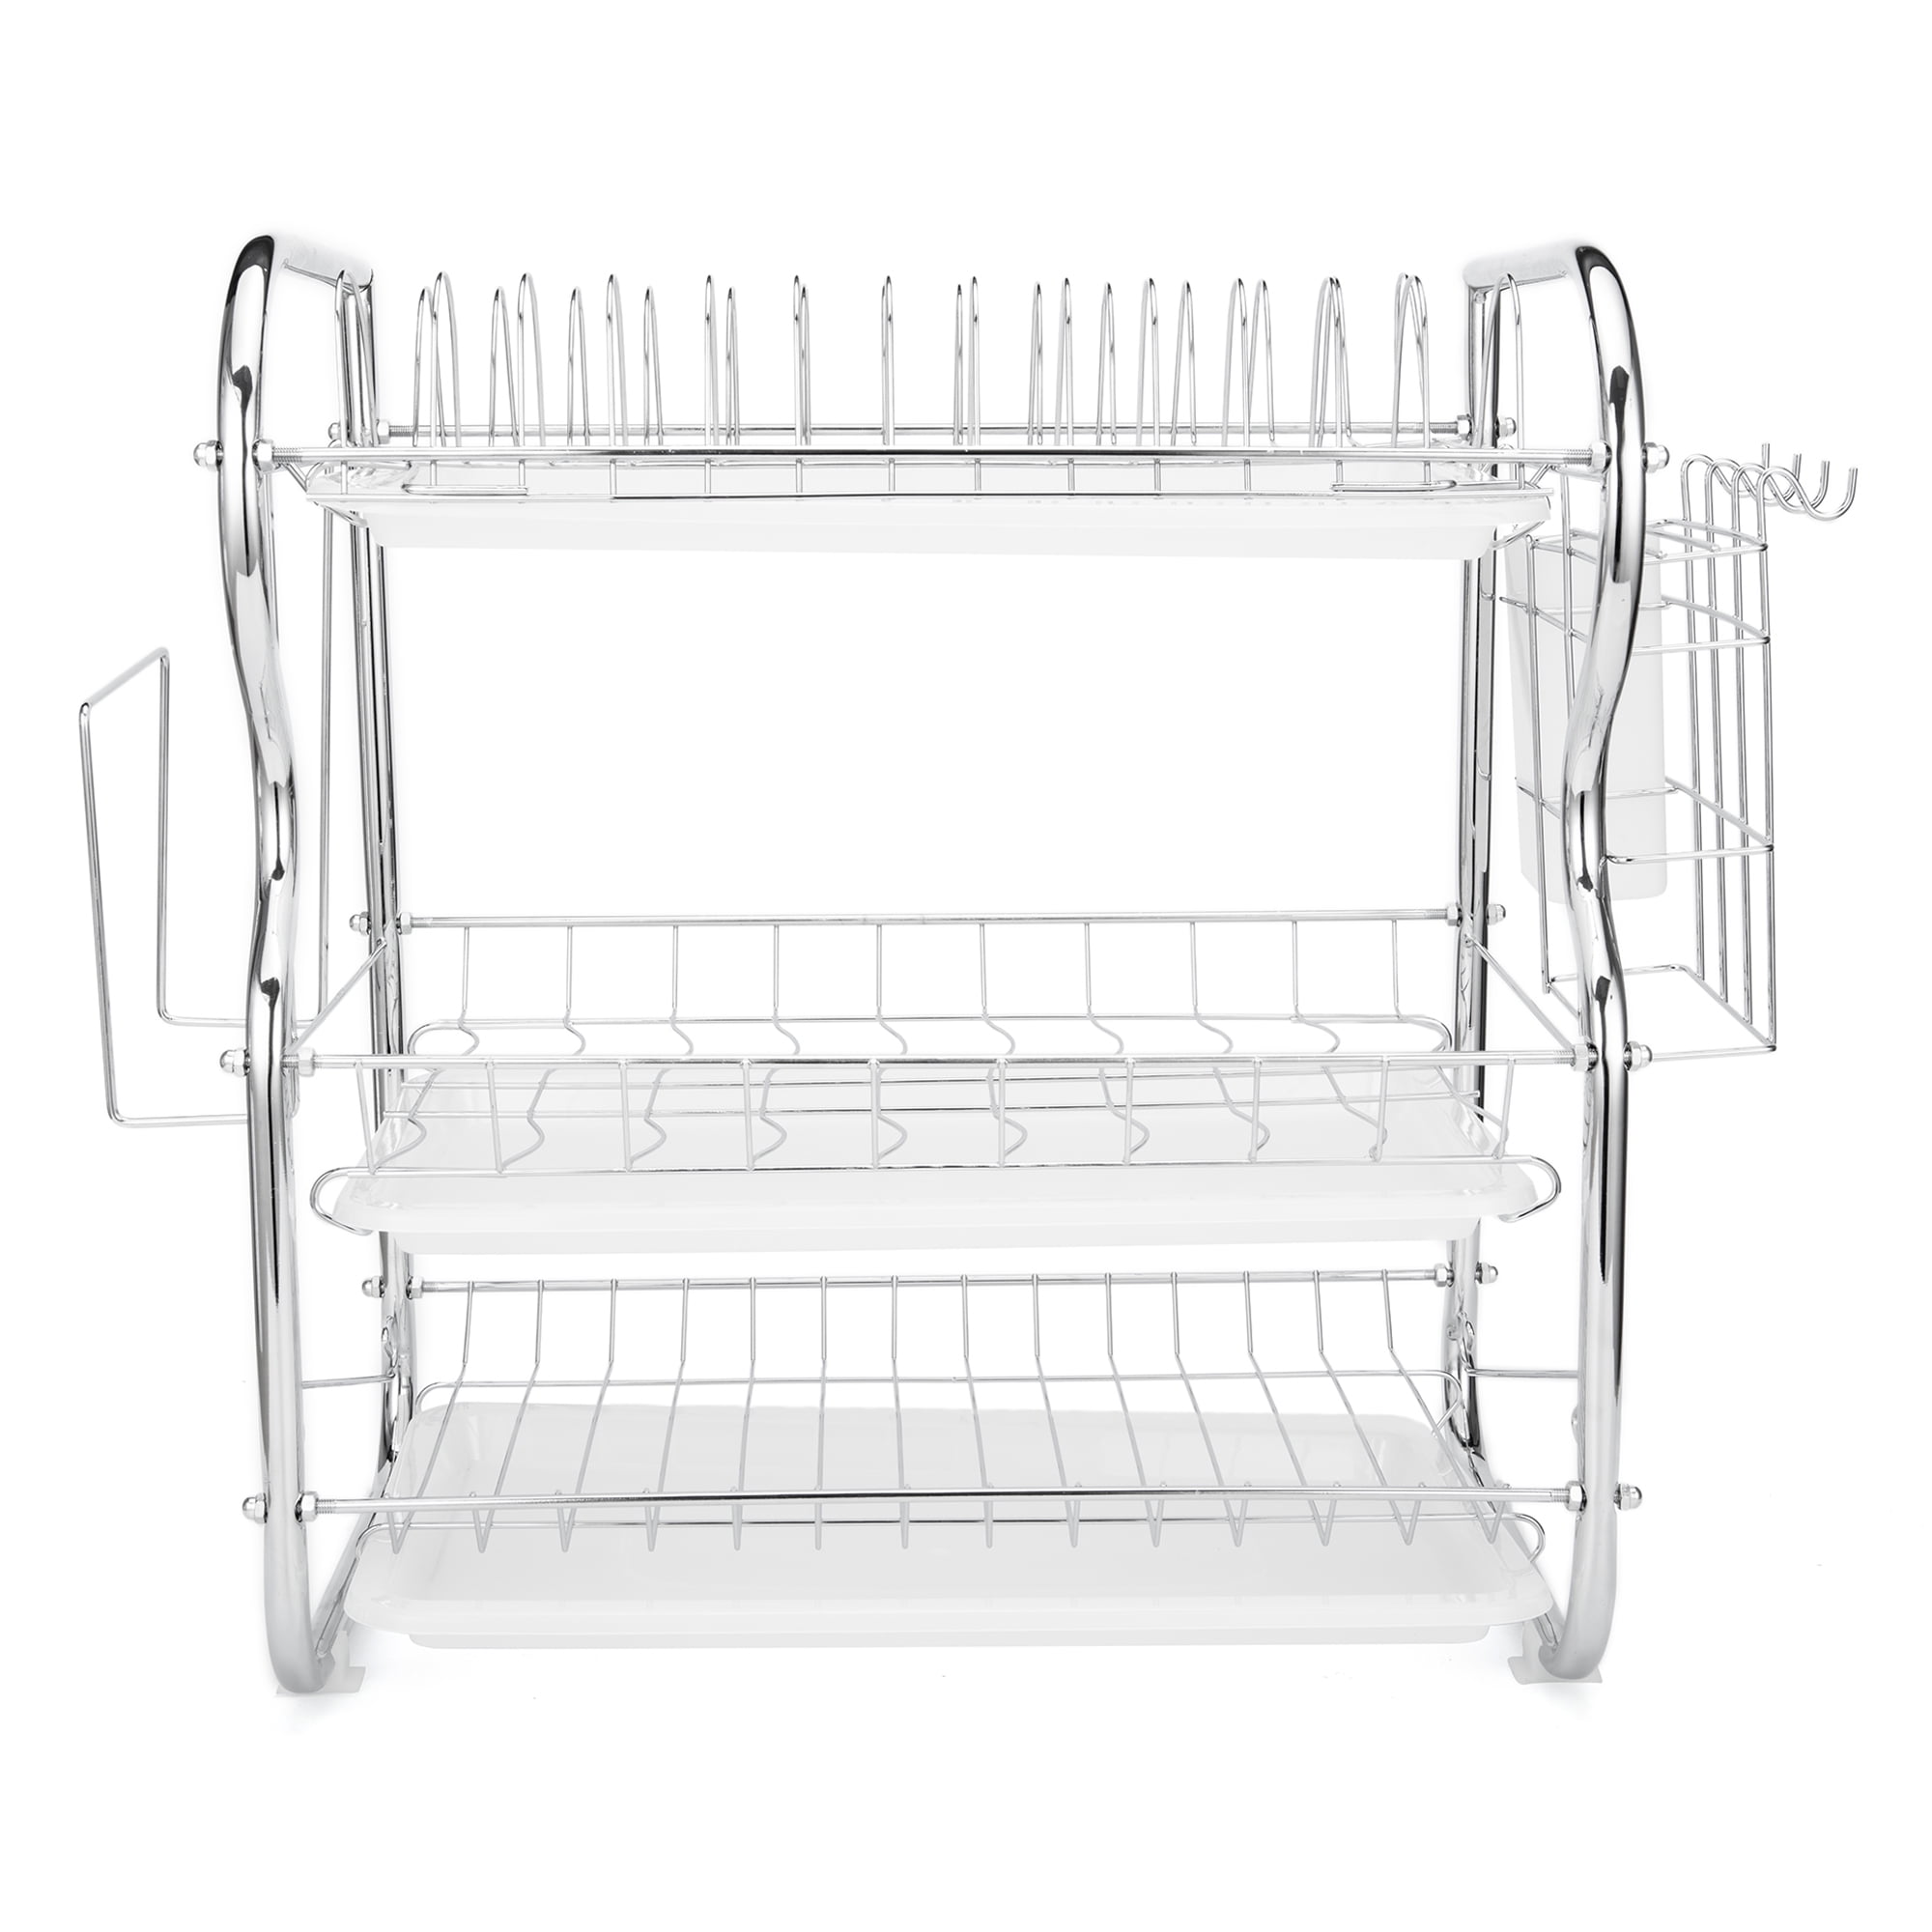  Linkidea Aluminum Dish Drying Rack, 16.9 x 12.6 Compact  Rustproof Dish Rack and Drainboard Set, Dish Drainer Strainers with  Adjustable Drainage and Removable Cutlery and Cup Holder Fit Kitchen: Home 